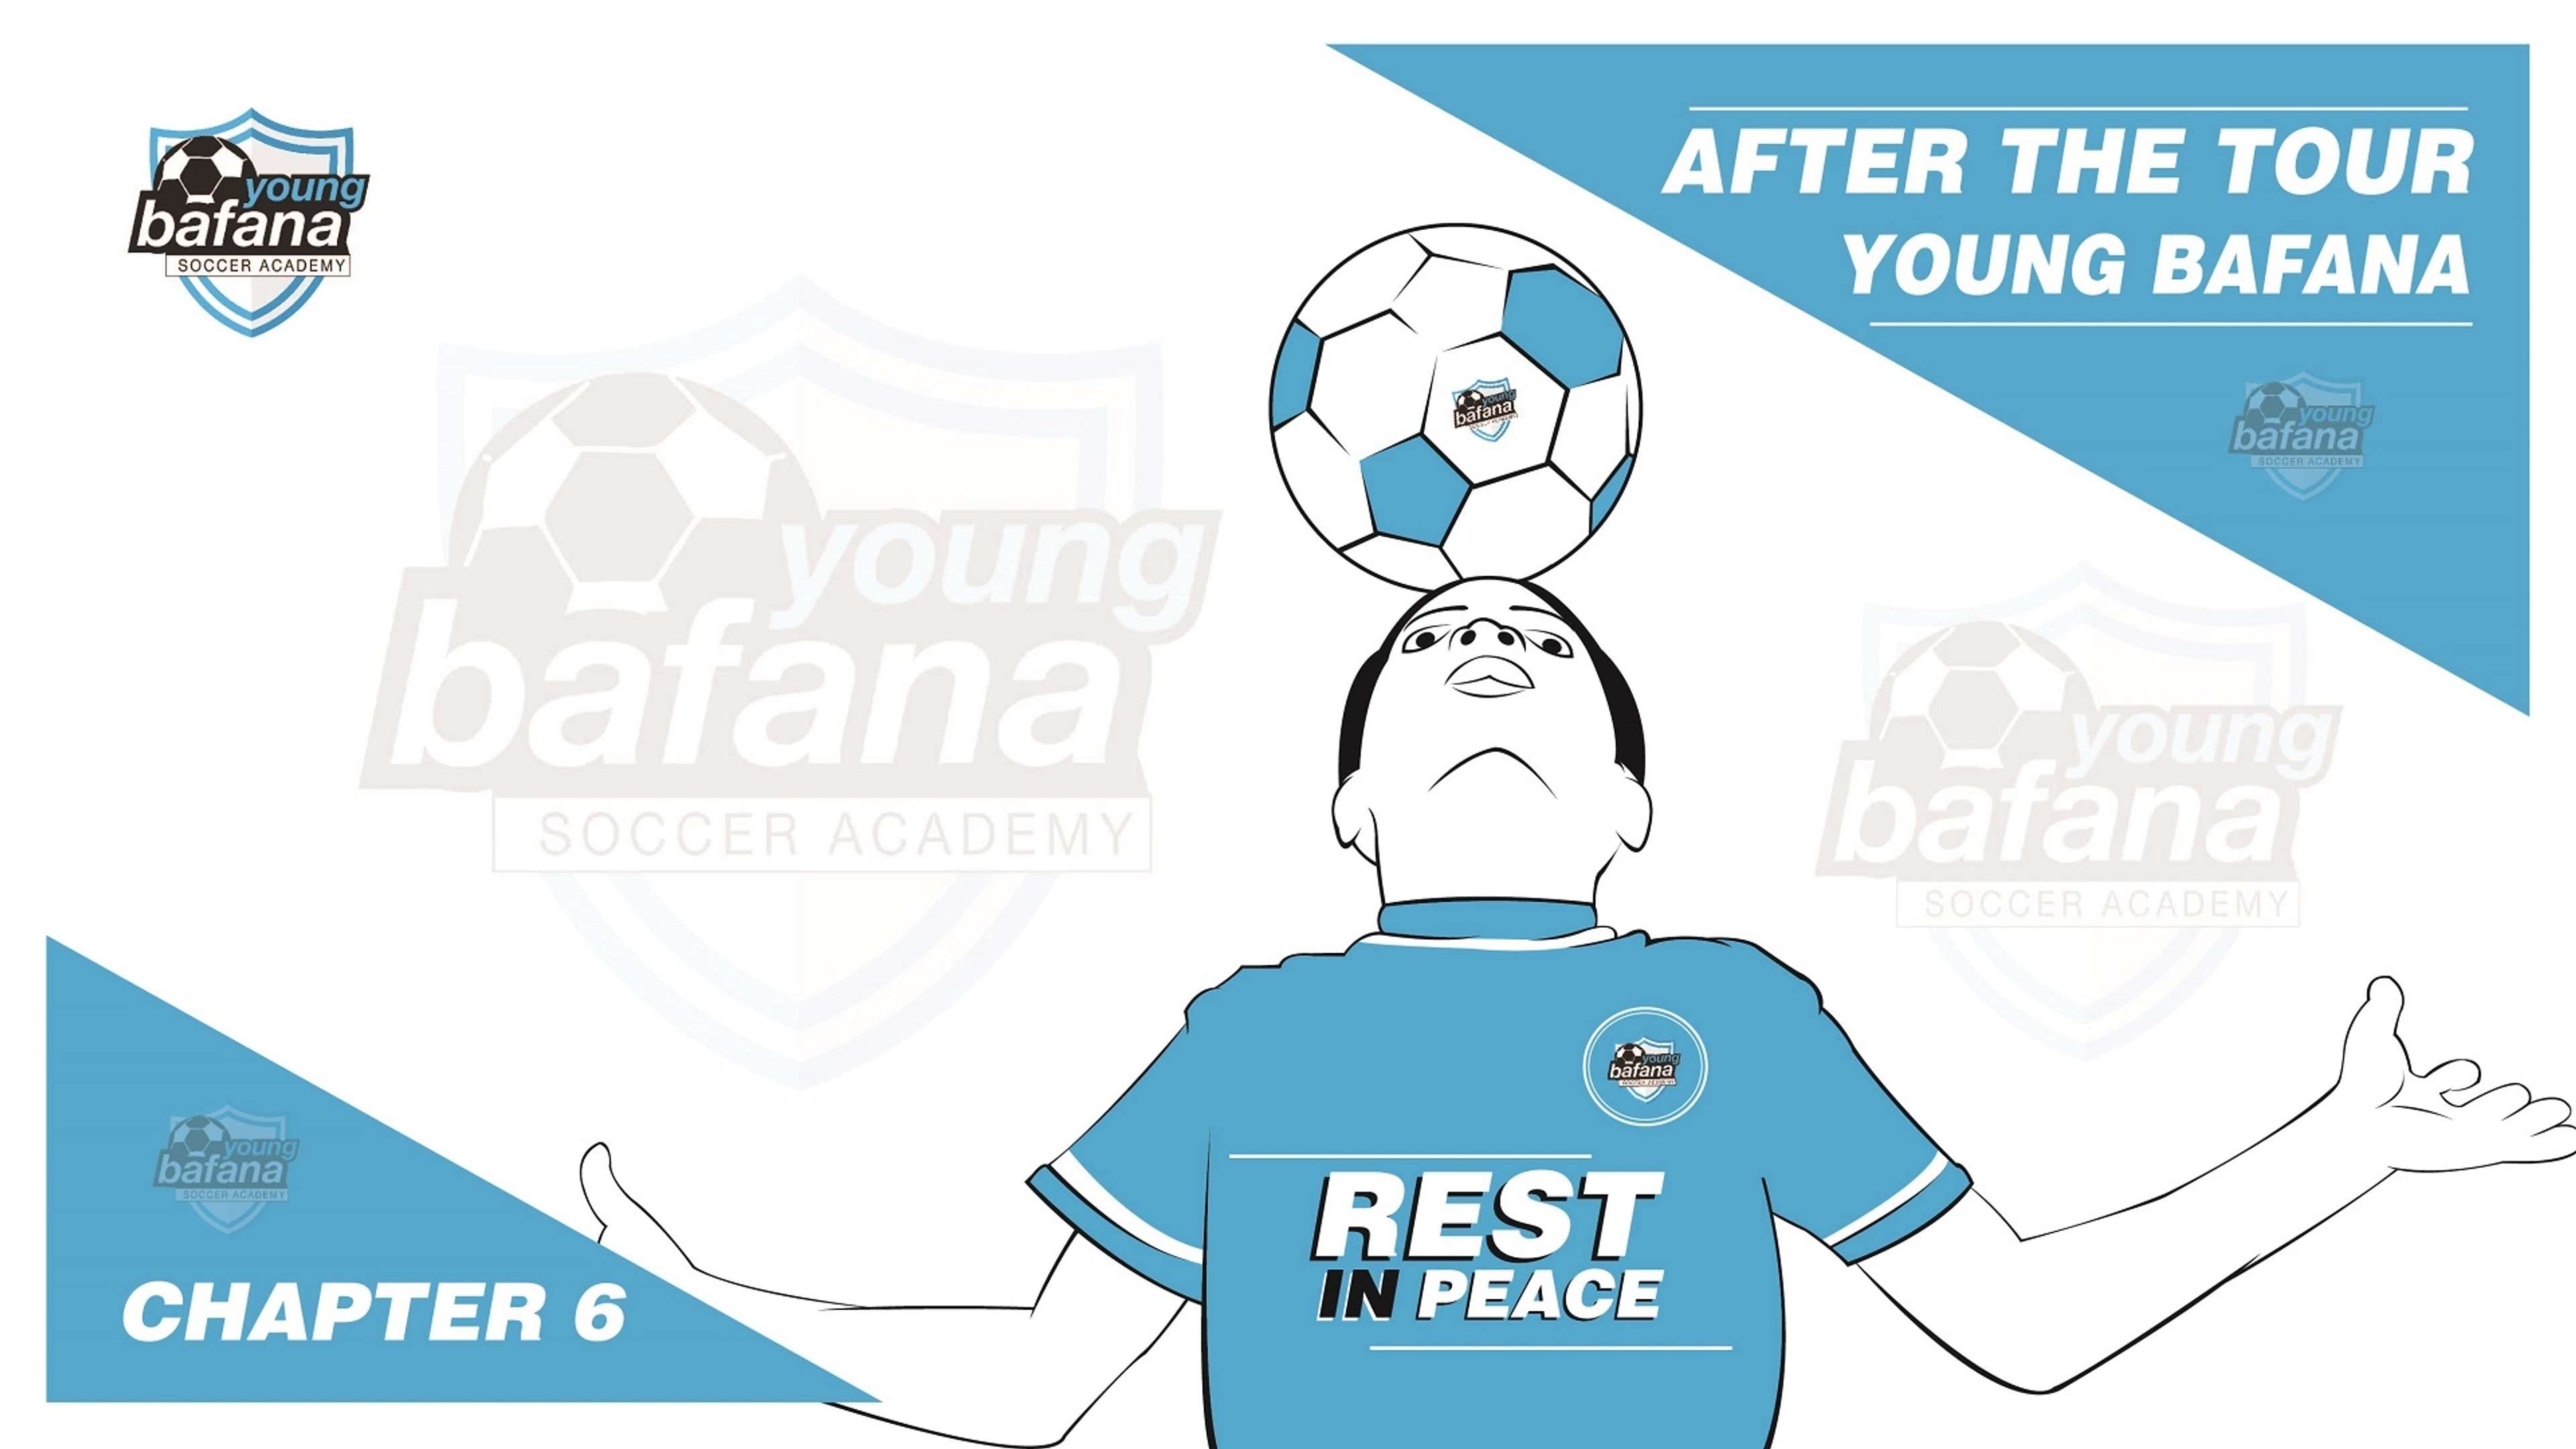 Rest in peace - GFX Young Bafana